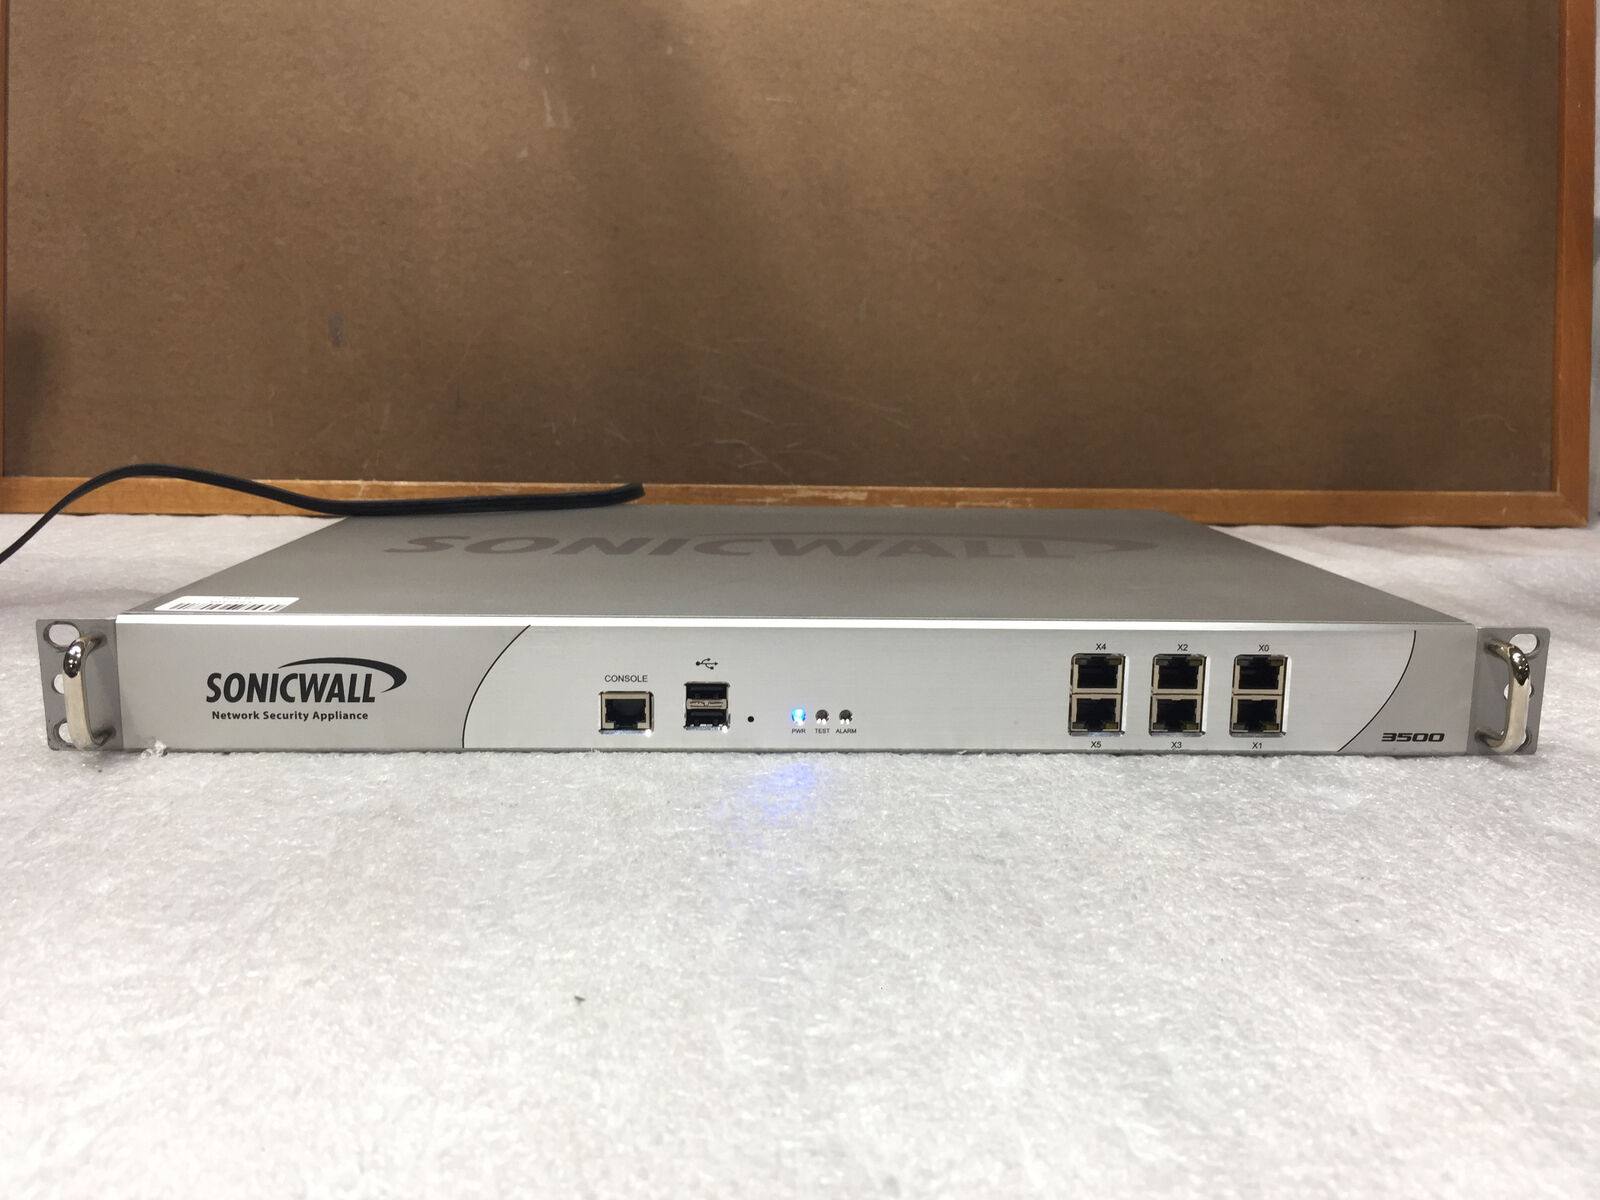 SonicWall NSA 3500 1RK21-071 Network Security Appliance/Firewall, -TESTED/RESET